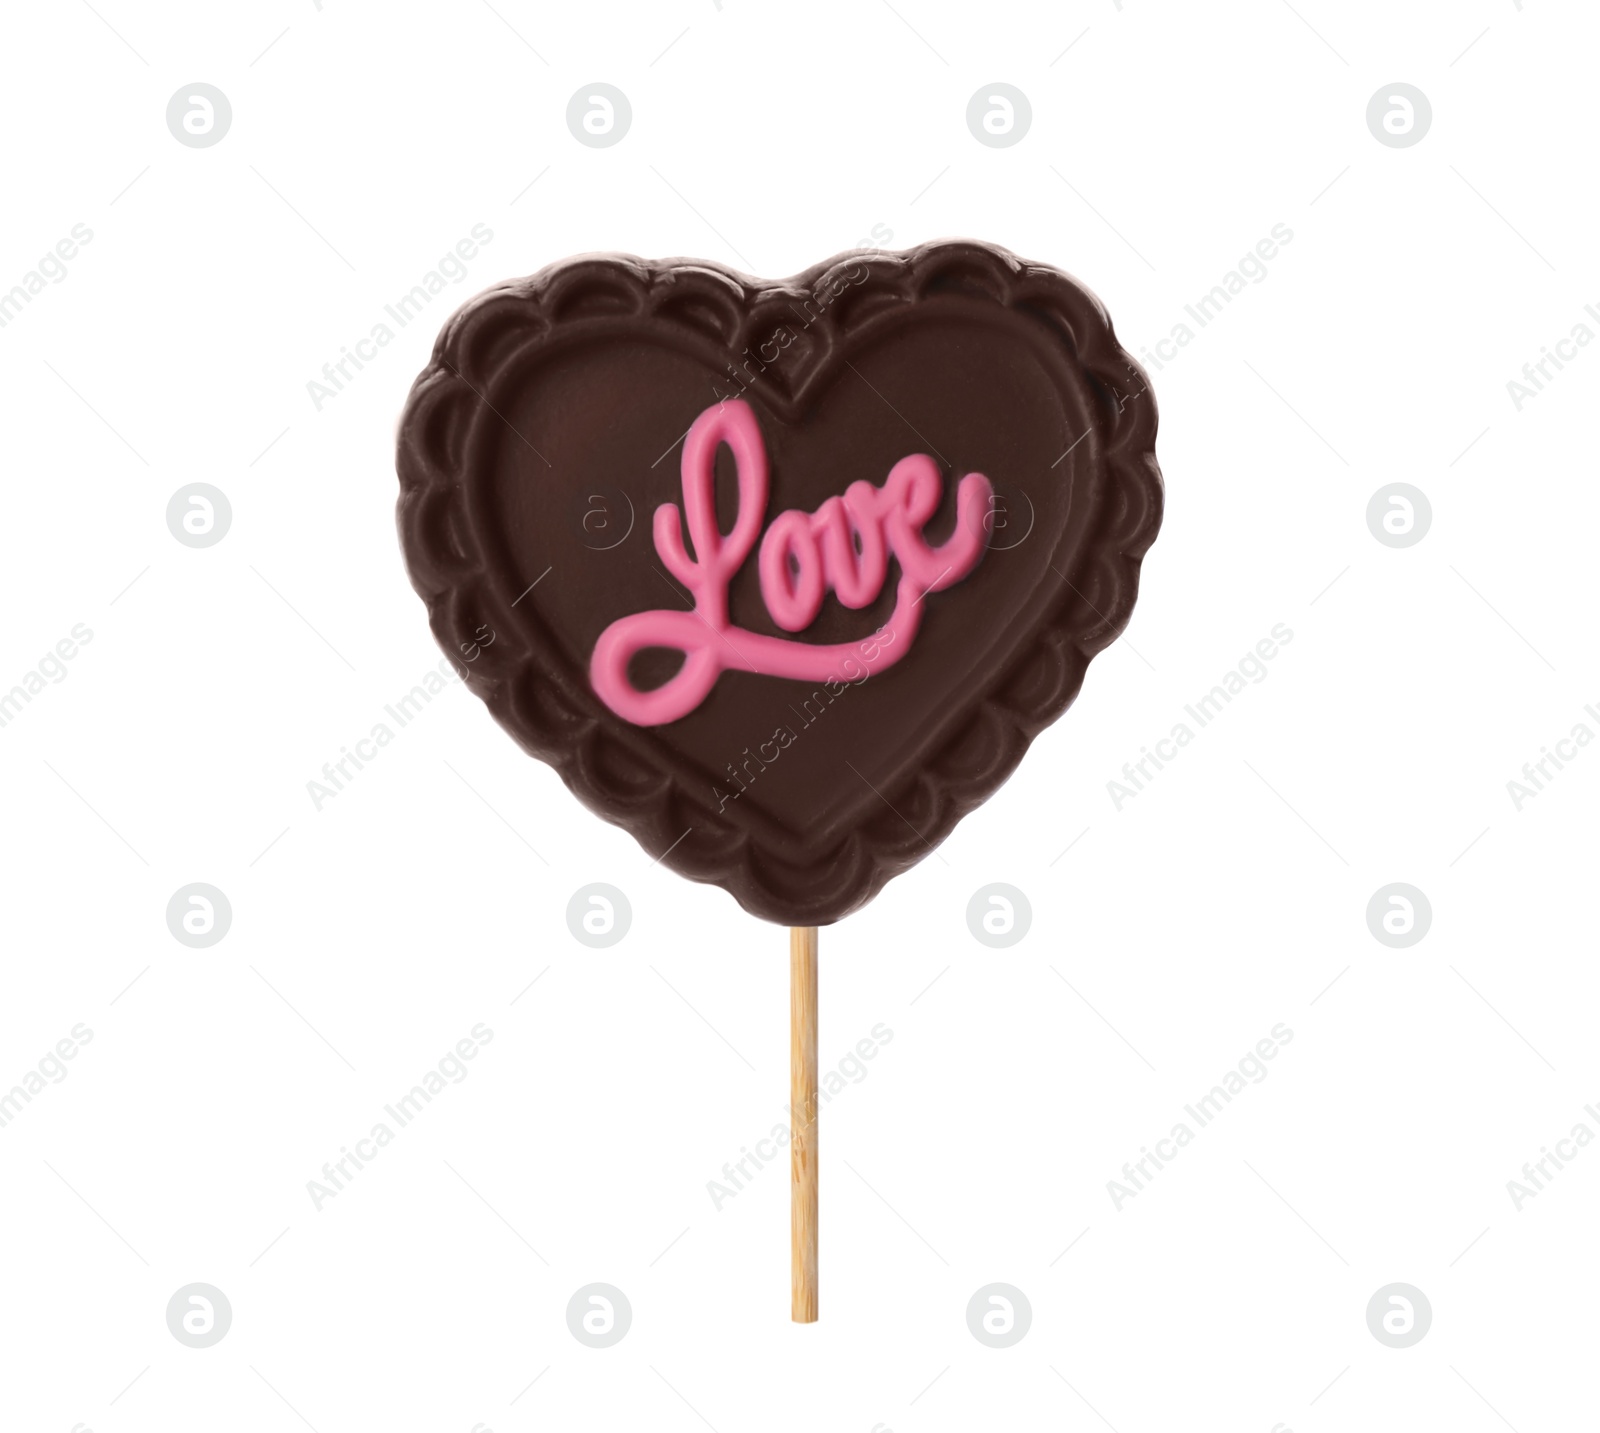 Photo of Heart shaped lollipop made of chocolate isolated on white